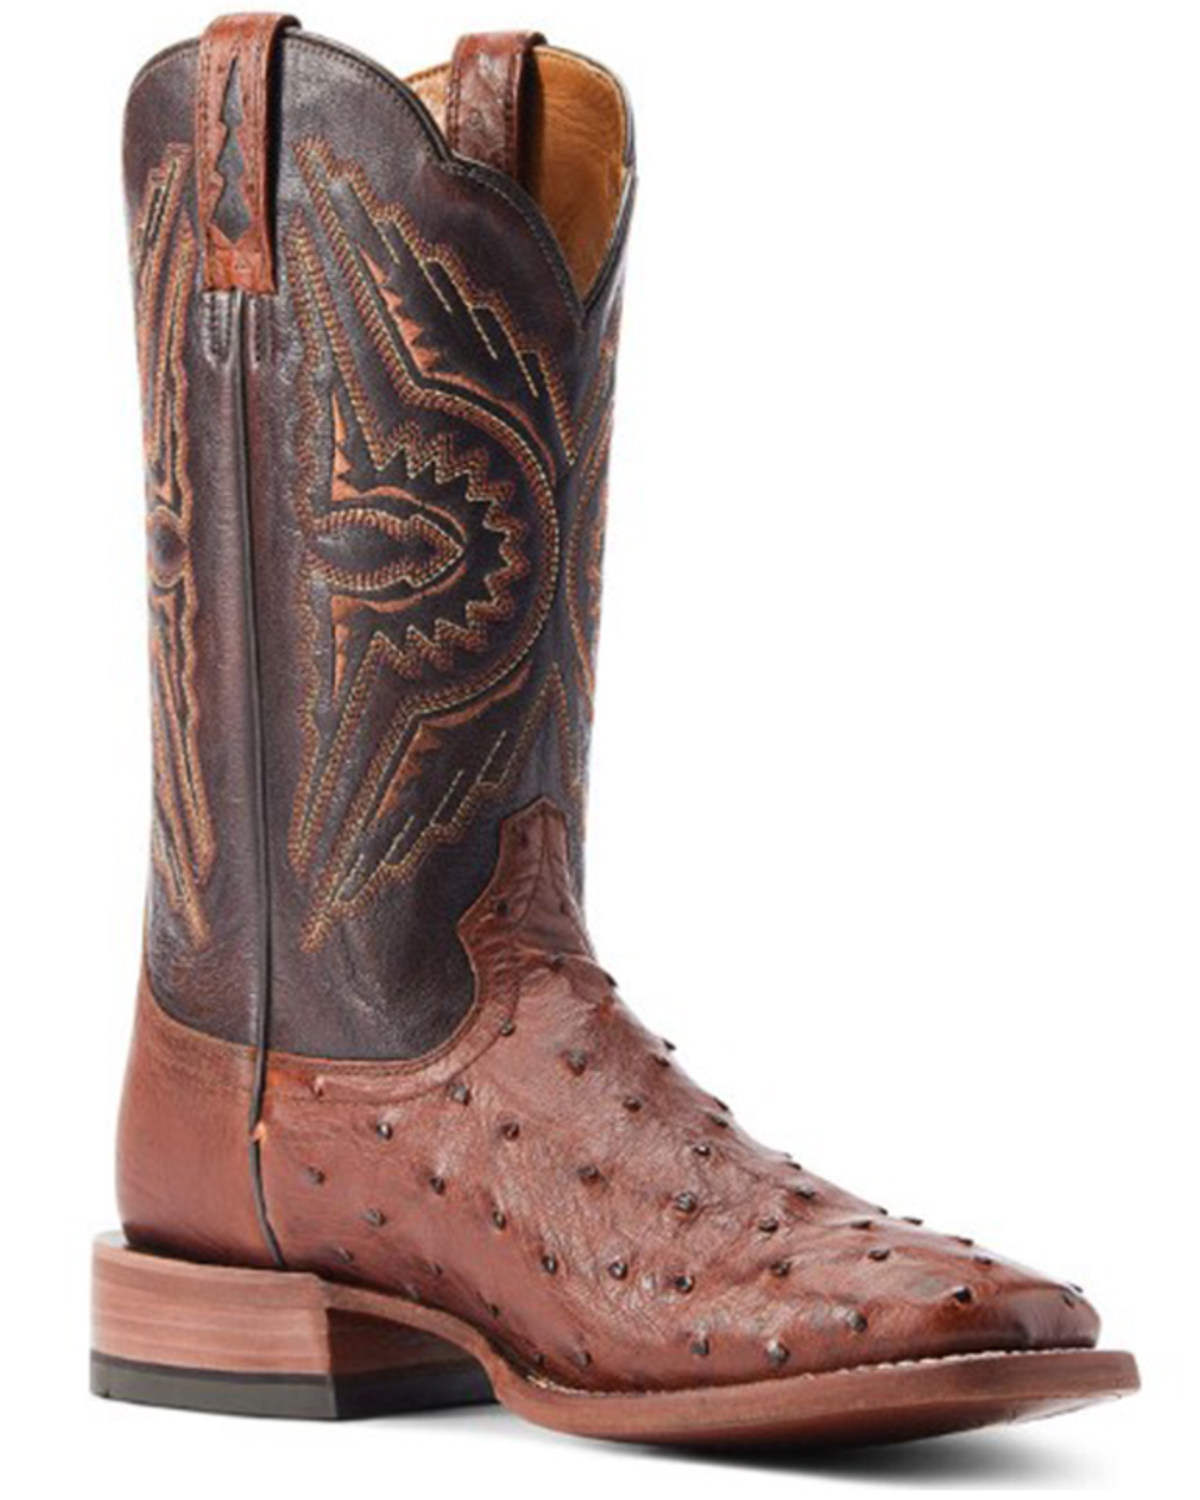 Ariat Men's Broncy Exotic Full Quill Ostrich Western Boots - Broad Square Toe